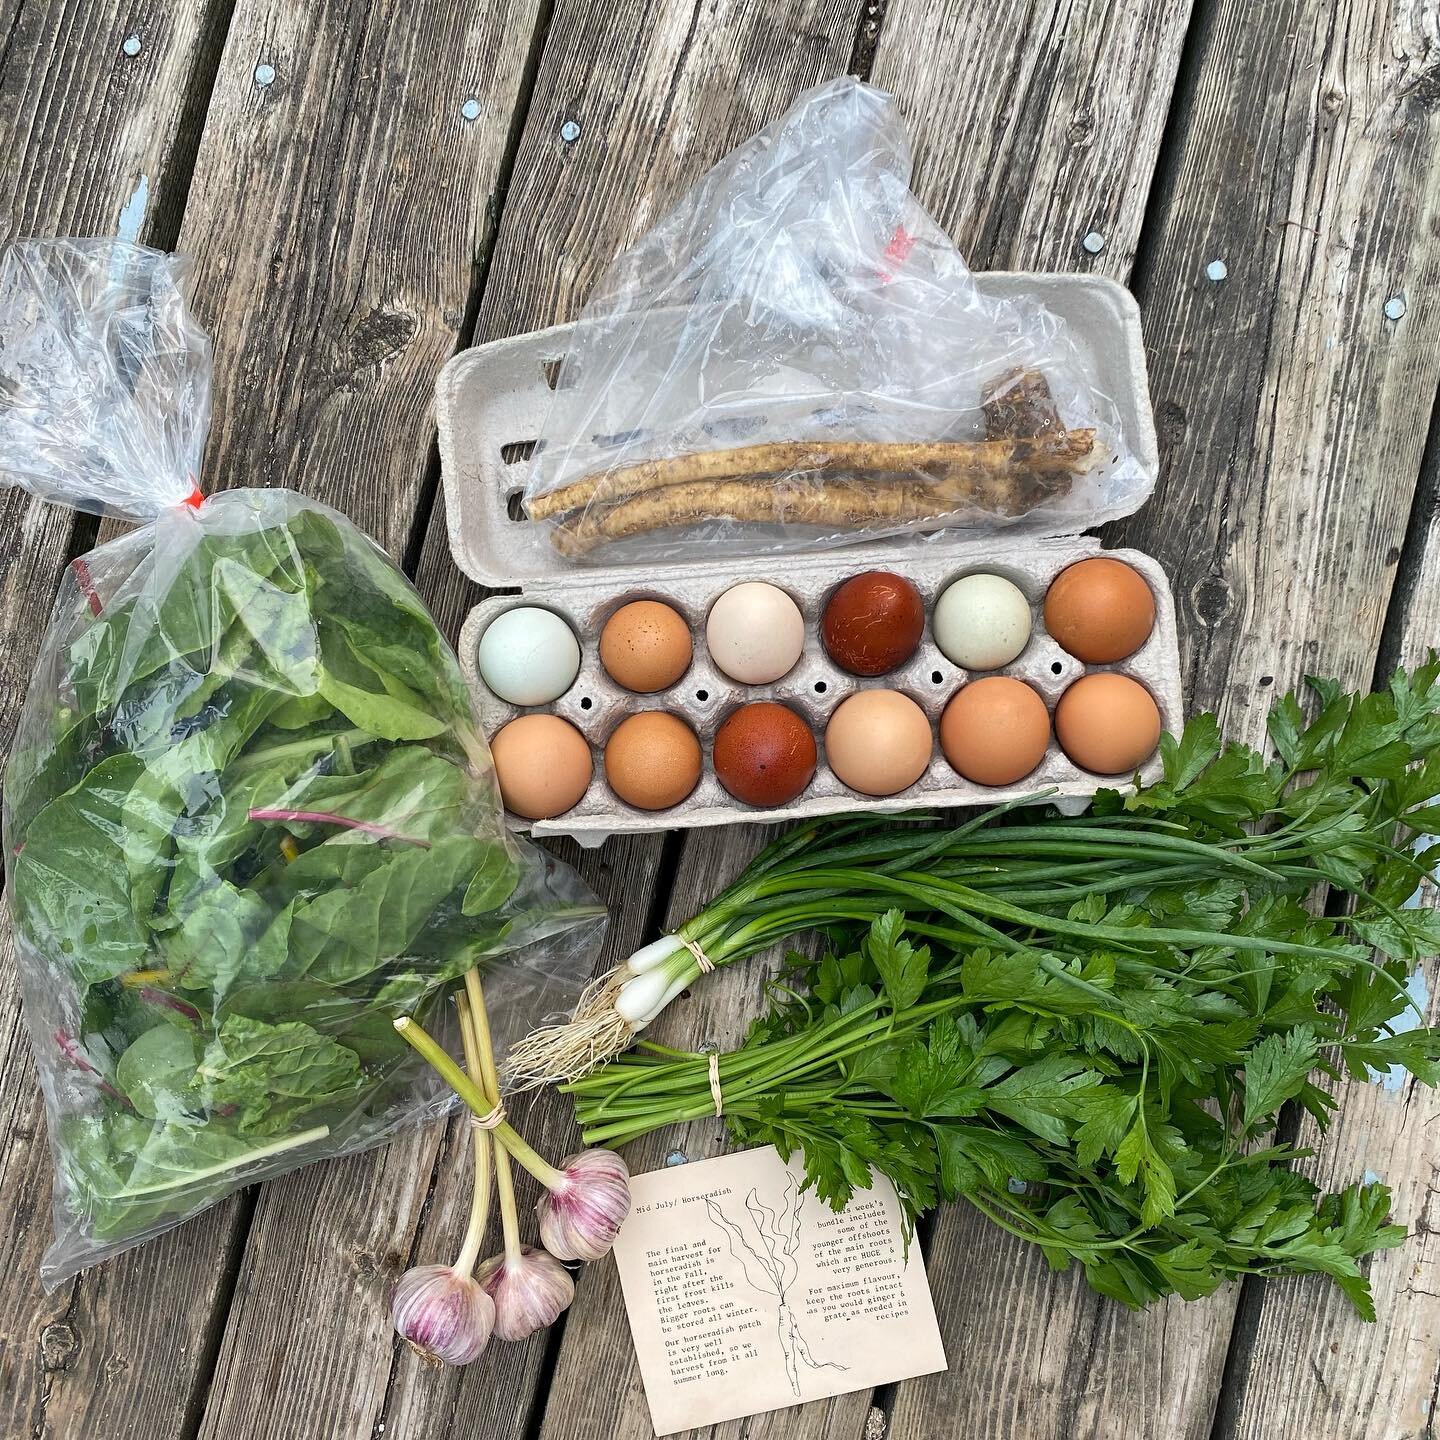 New small spade CSA session open now! Canned Heat CSA - Aug. 9 to Sept. 27, home delivery of eggs and veg (and maybe a zine or two) to GTA. For info and to sign up go to the link in bio! #csasignup #csafarm #smallspadefarm